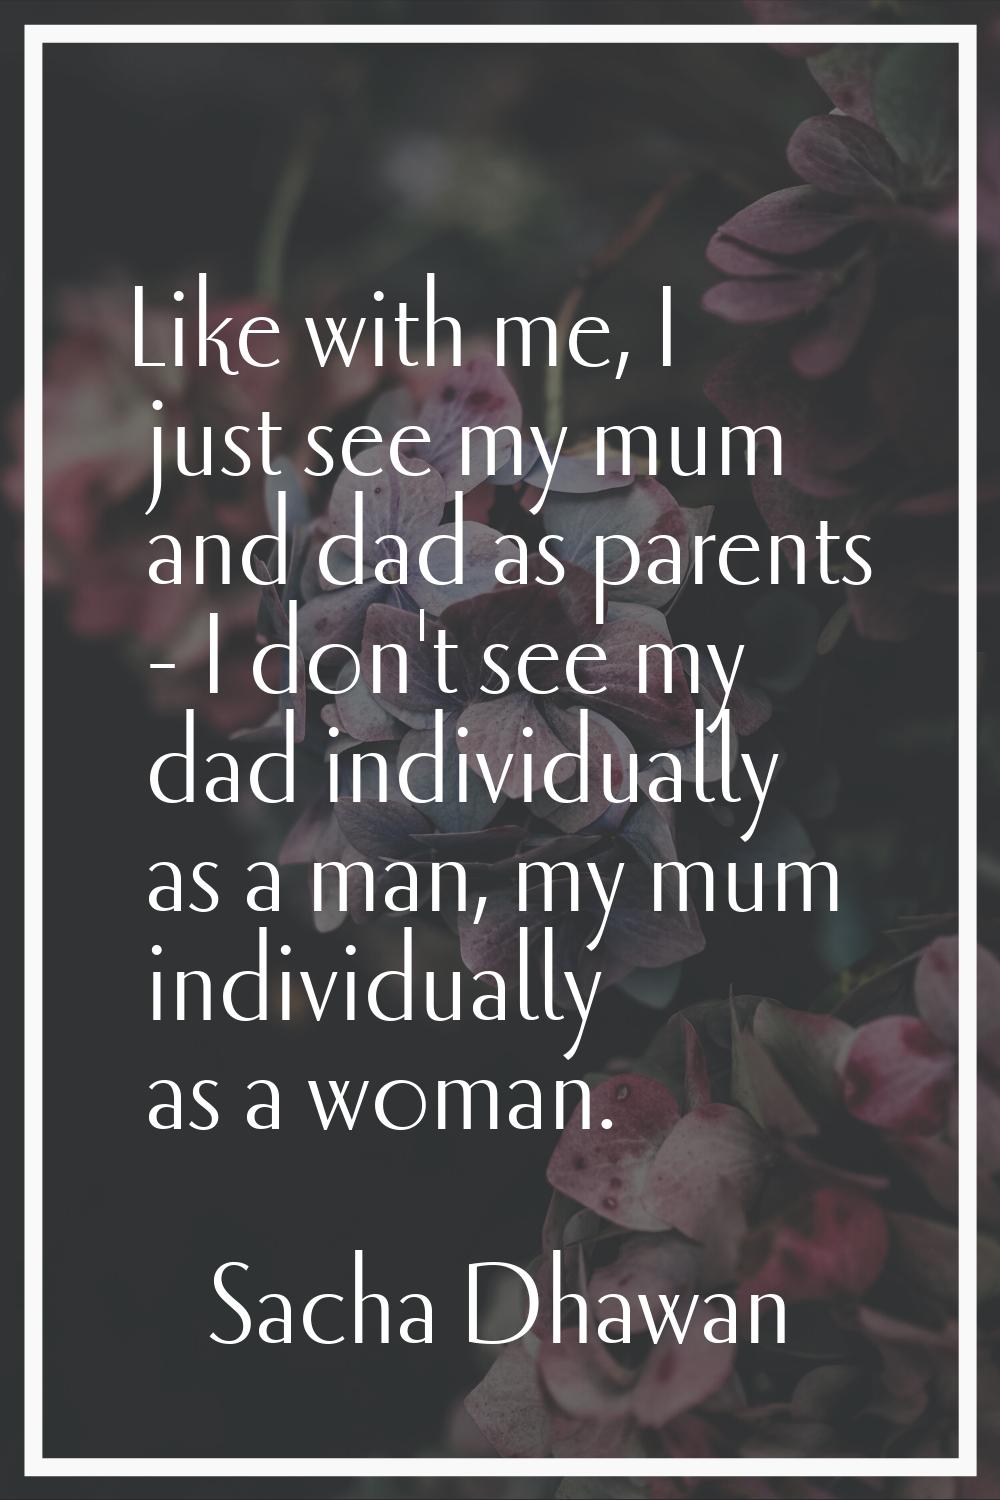 Like with me, I just see my mum and dad as parents - I don't see my dad individually as a man, my m